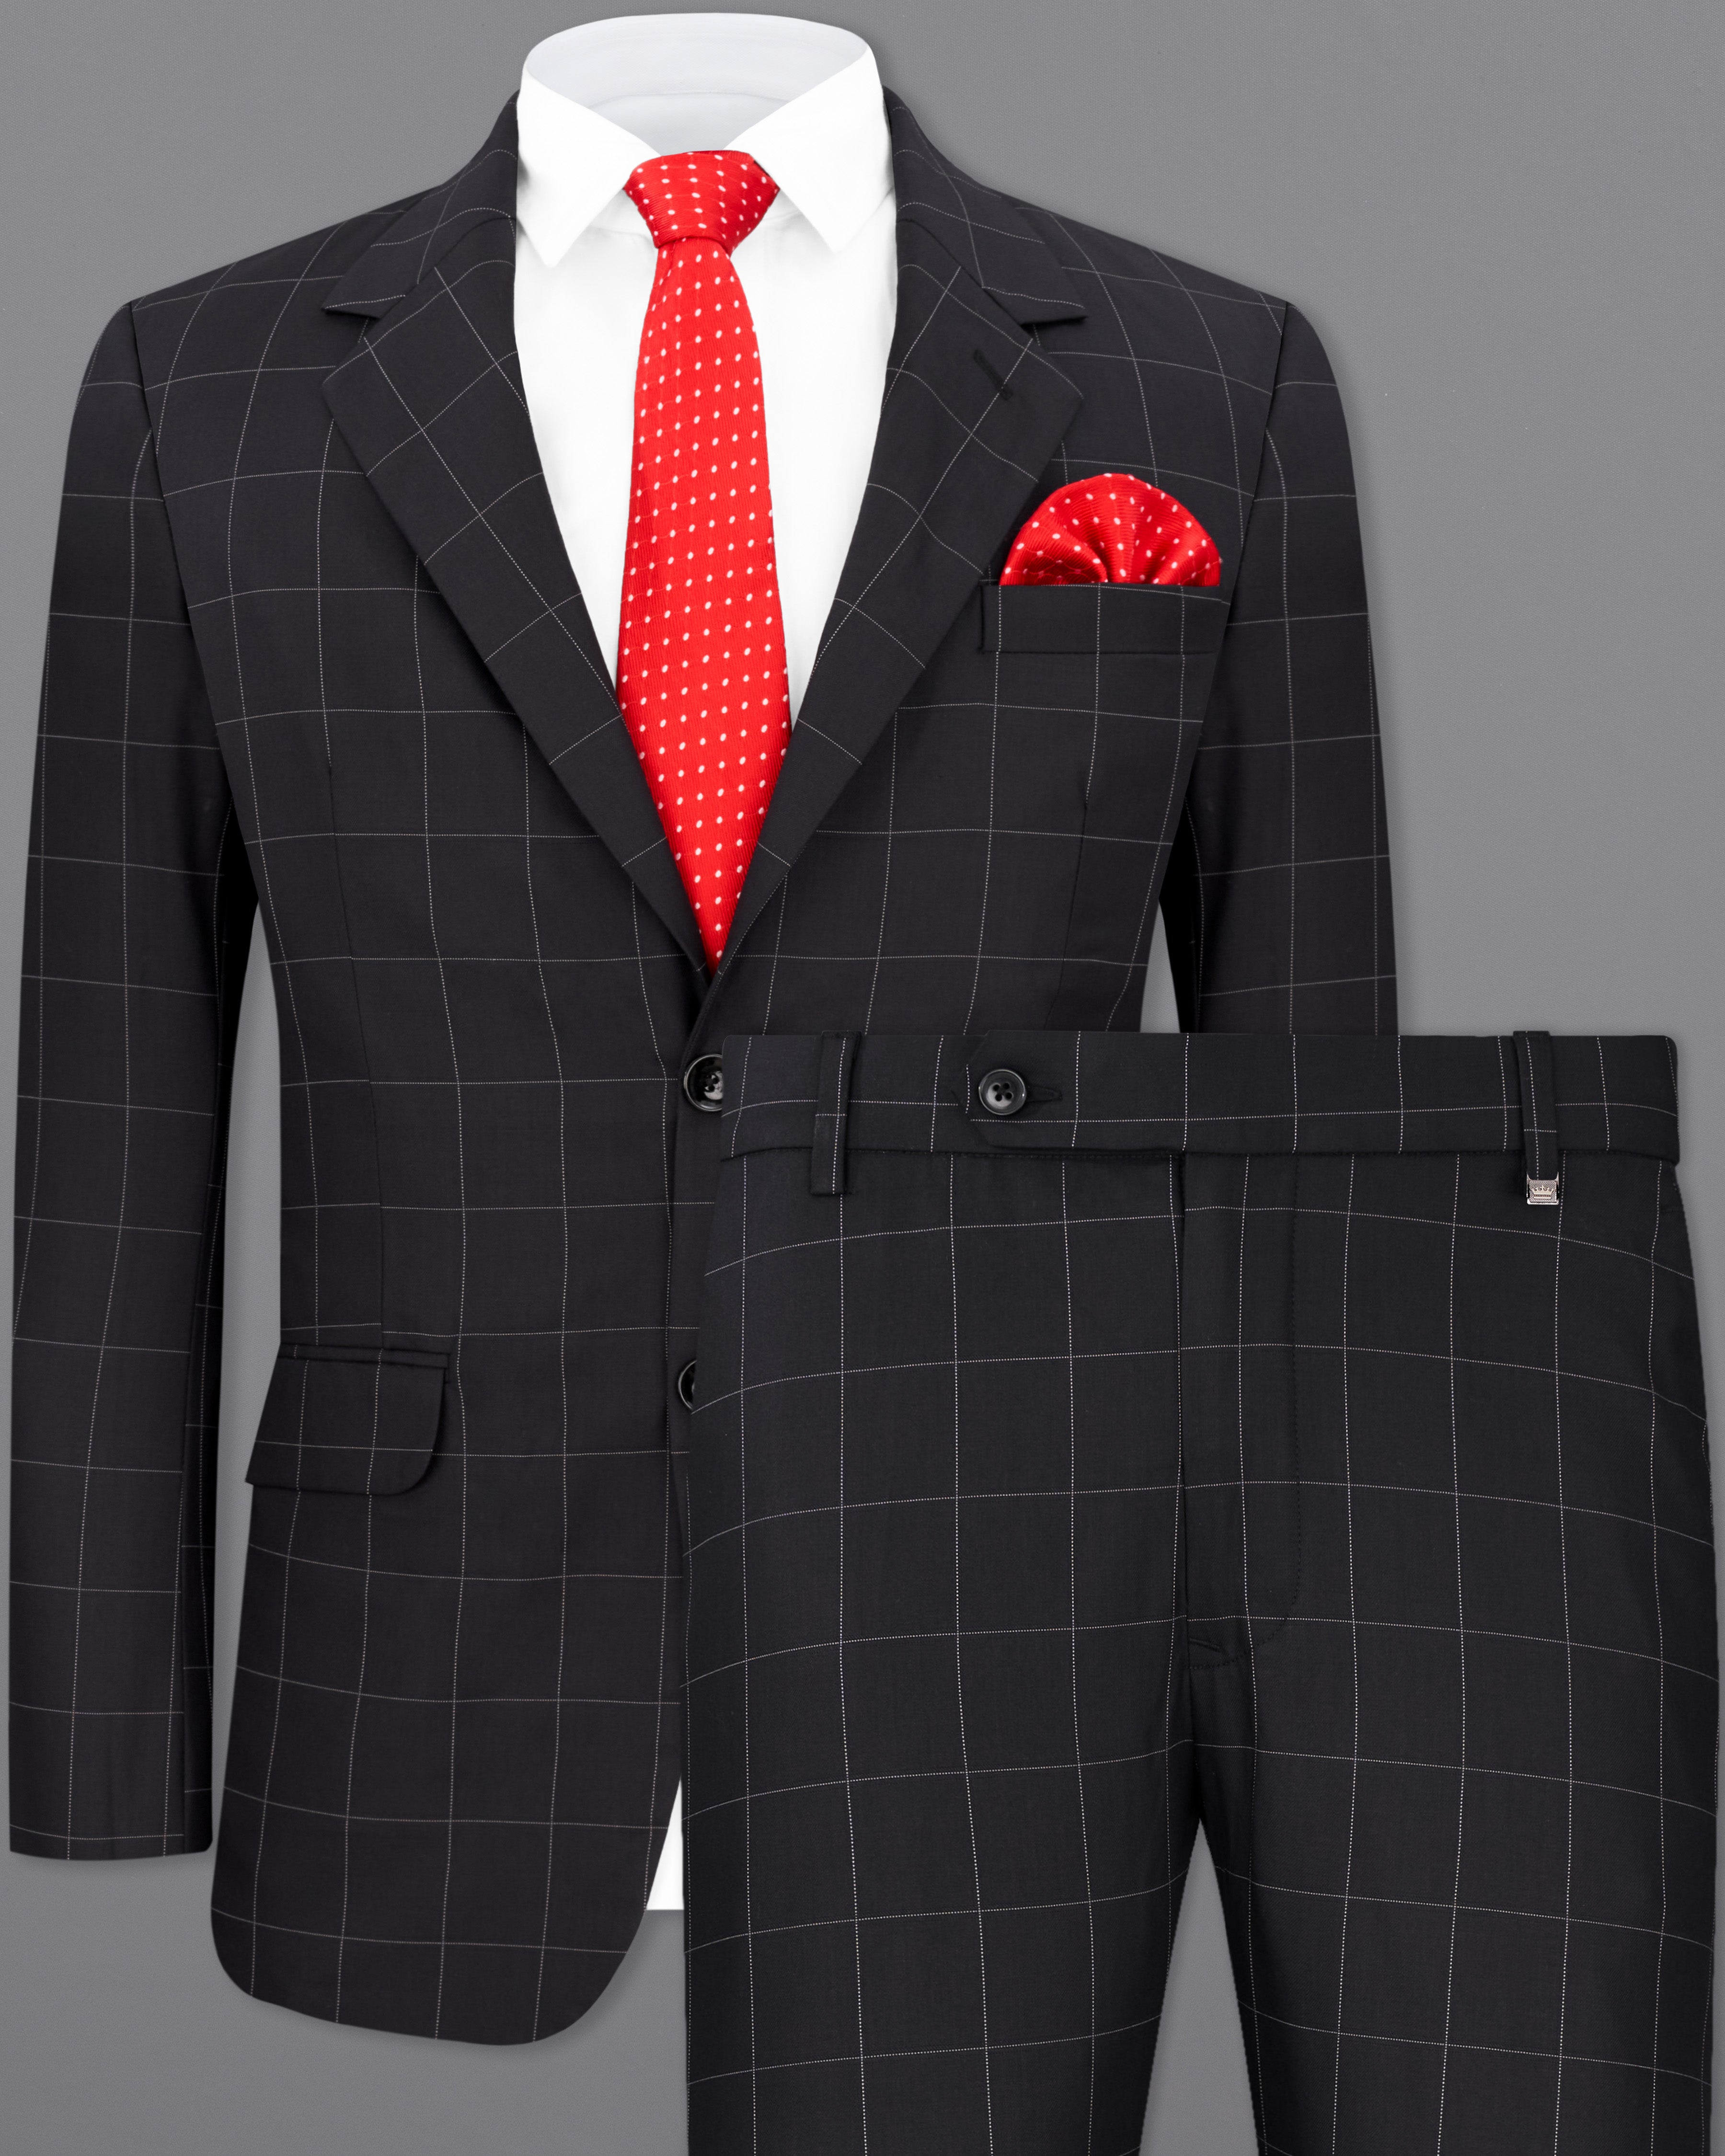 Buy Plaid Suits For Men in Blue, Grey, Tan & All Colors - French Crown India